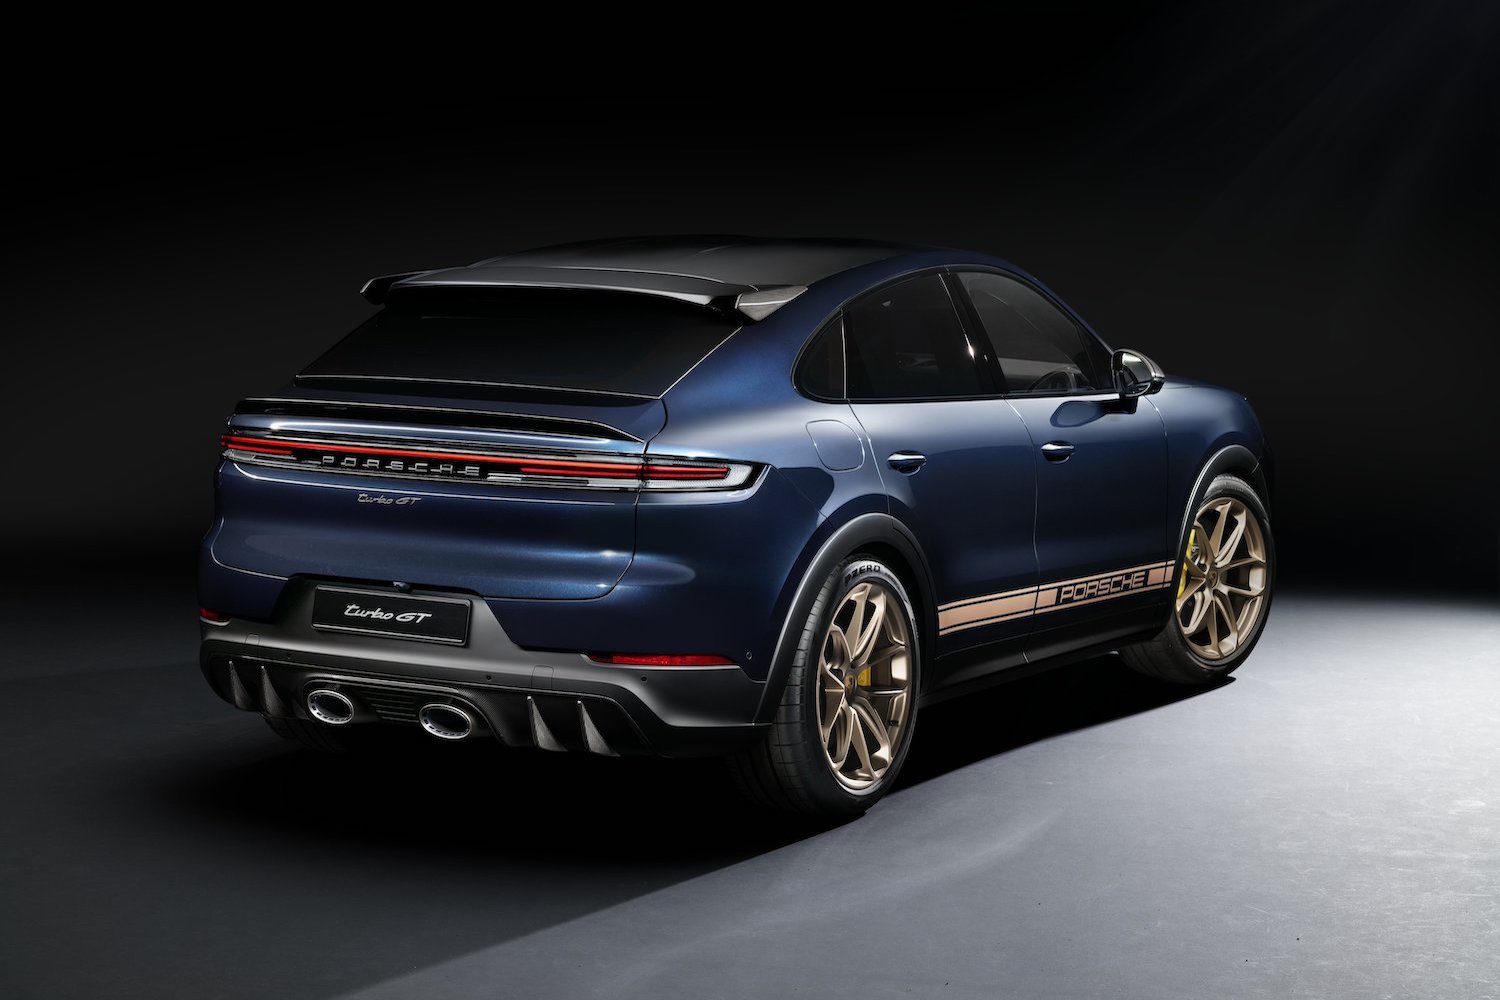 2024 Porsche Cayenne Turbo GT rear end angle from passenger's side in a dark studio.